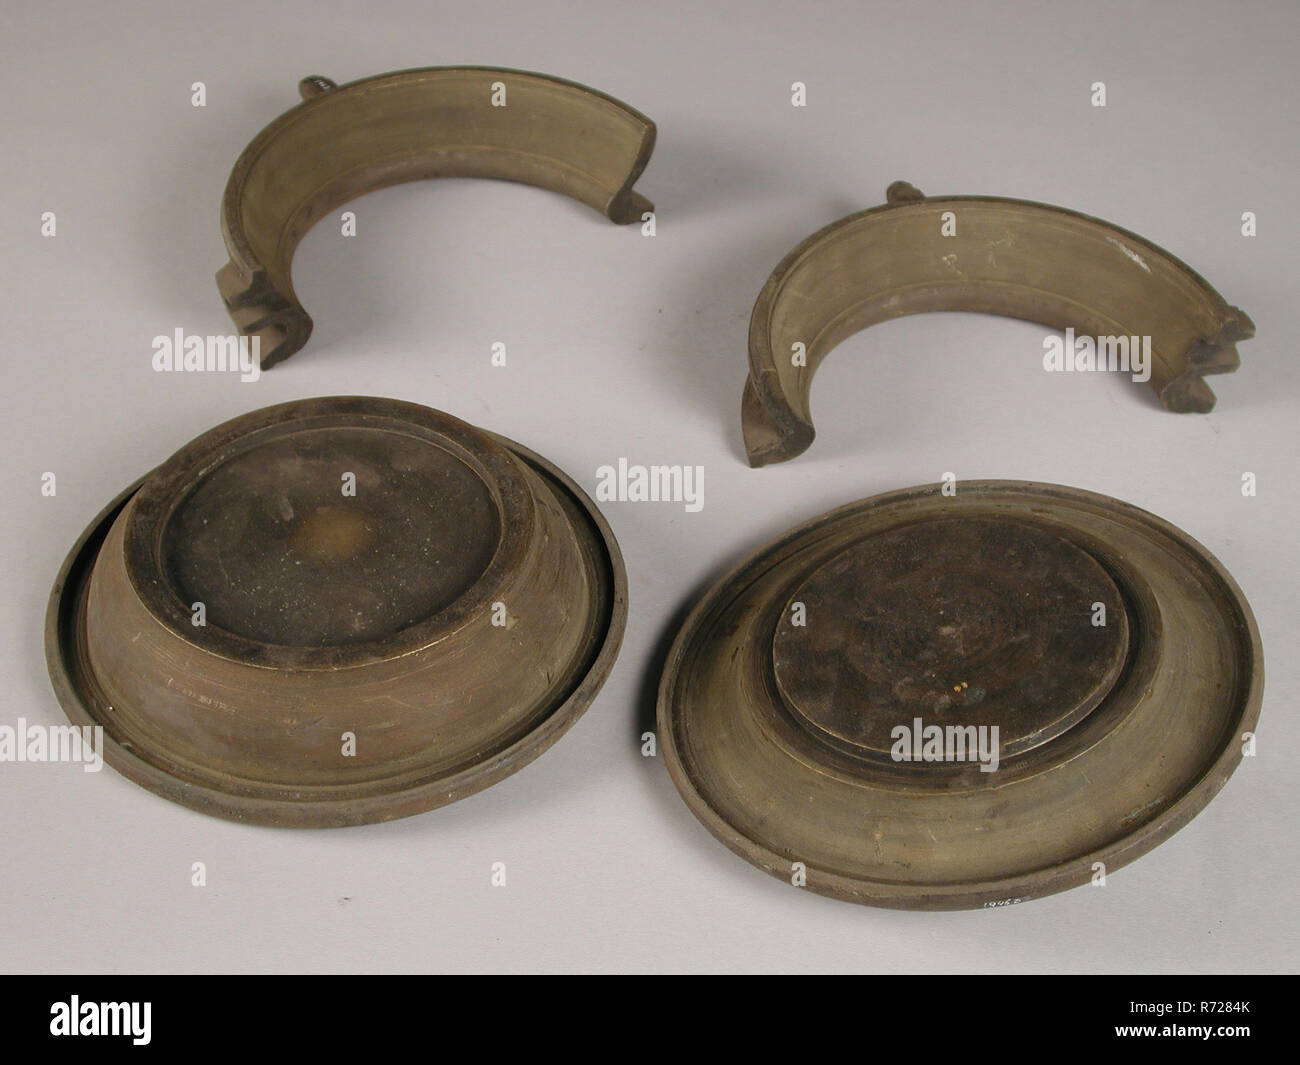 Four-piece bronze mold for top of chamber pot, mold casting tool tools base metal bronze, cast turned Four-piece bronze mold for casting the edge of chamber pot bottom: 2834 401 Rotterdam tin foundry tin stain tin Meeuws Druy craft Shapes are from the originally 18th century Rotterdam tinnegieter J Druy. The large molds that were not signed or dated were the property of the tinker guild and were rented to the small tin caster. Stock Photo